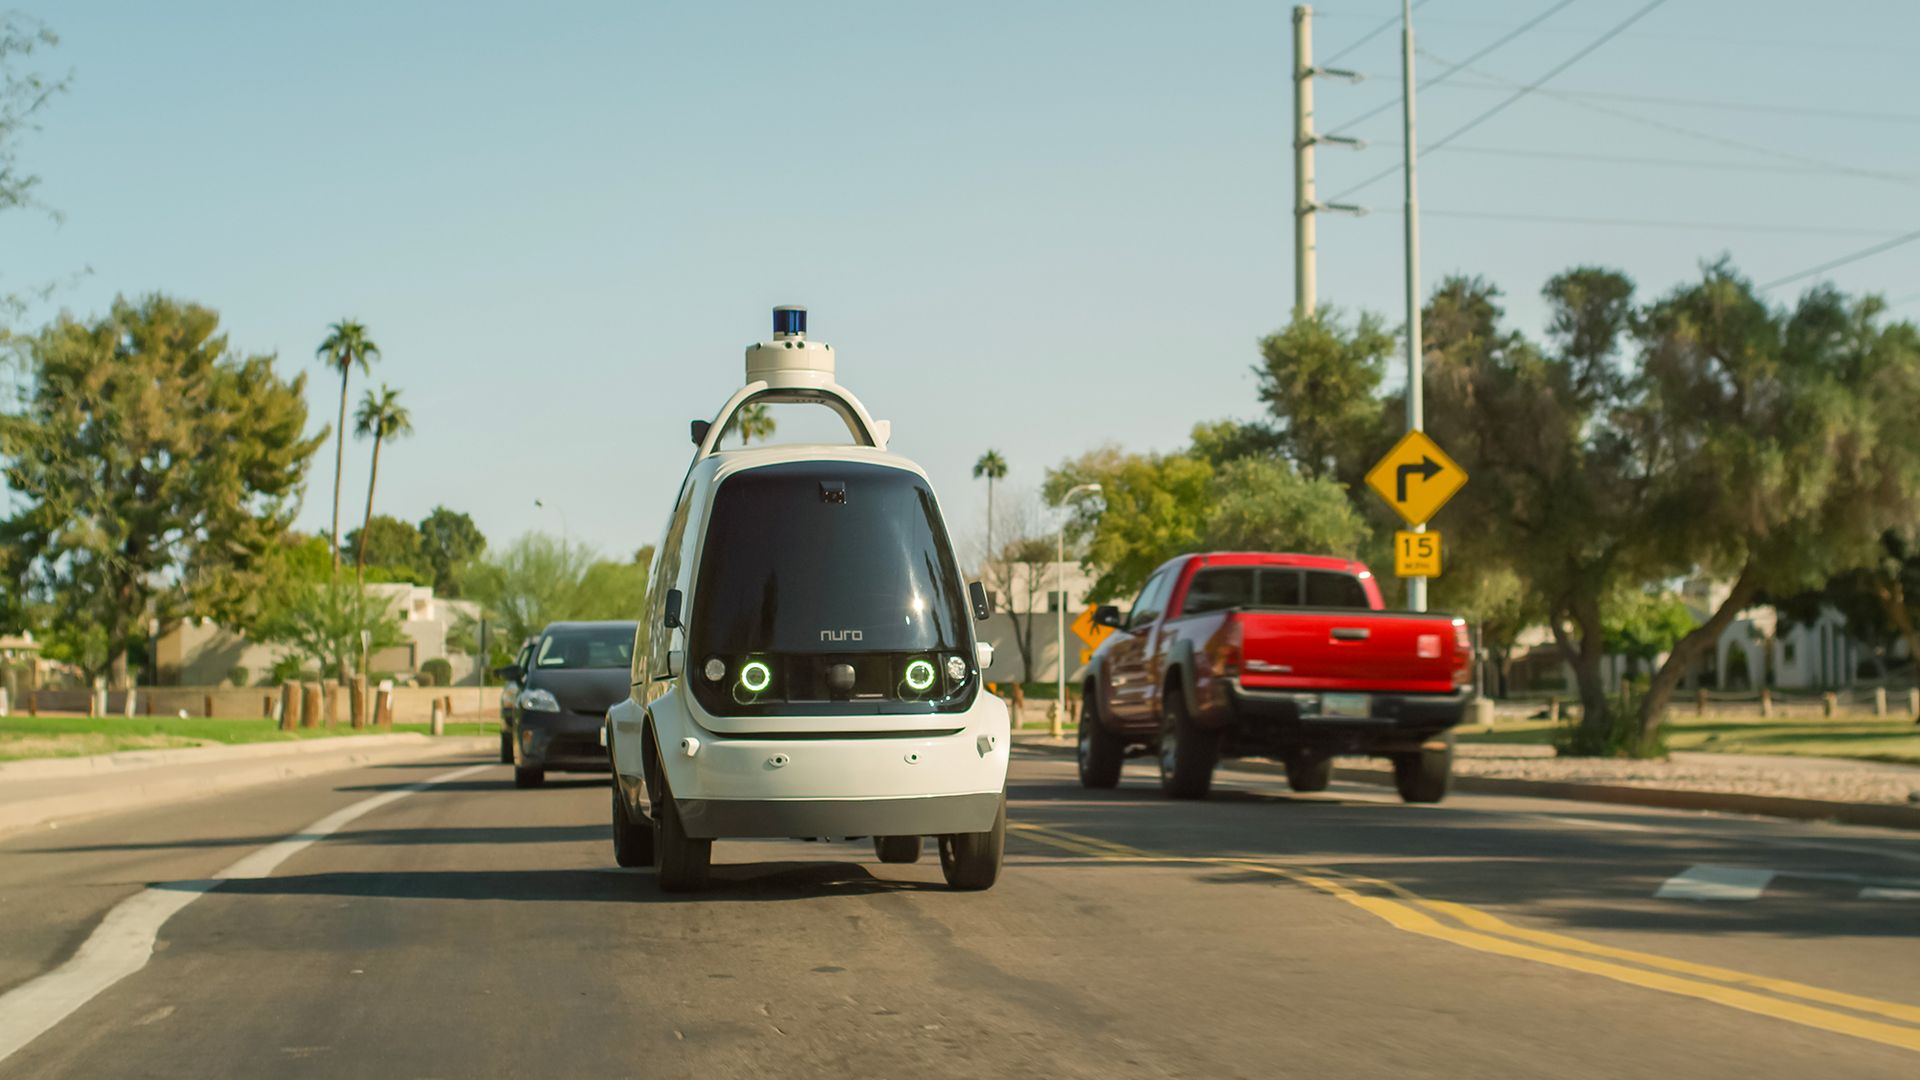 Image of Nuro's tiny automated grocery delivery vehicle